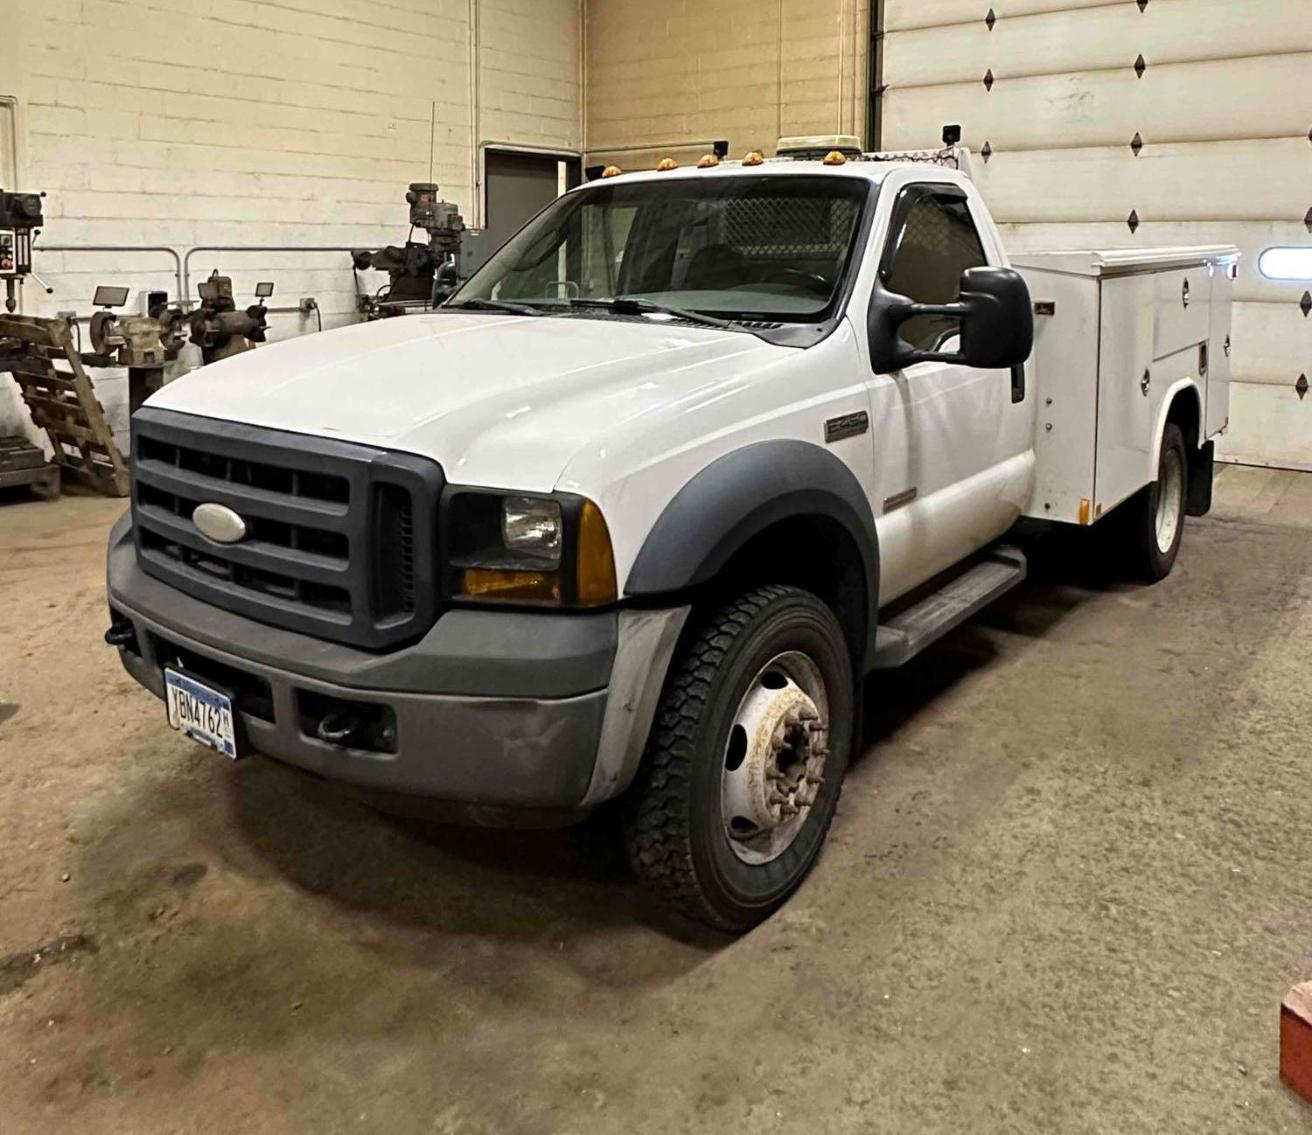 2002 Ford F-550 With Hydraulic Crane, 2007 Ford F-450, Lawncare & Snow Removal Equipment